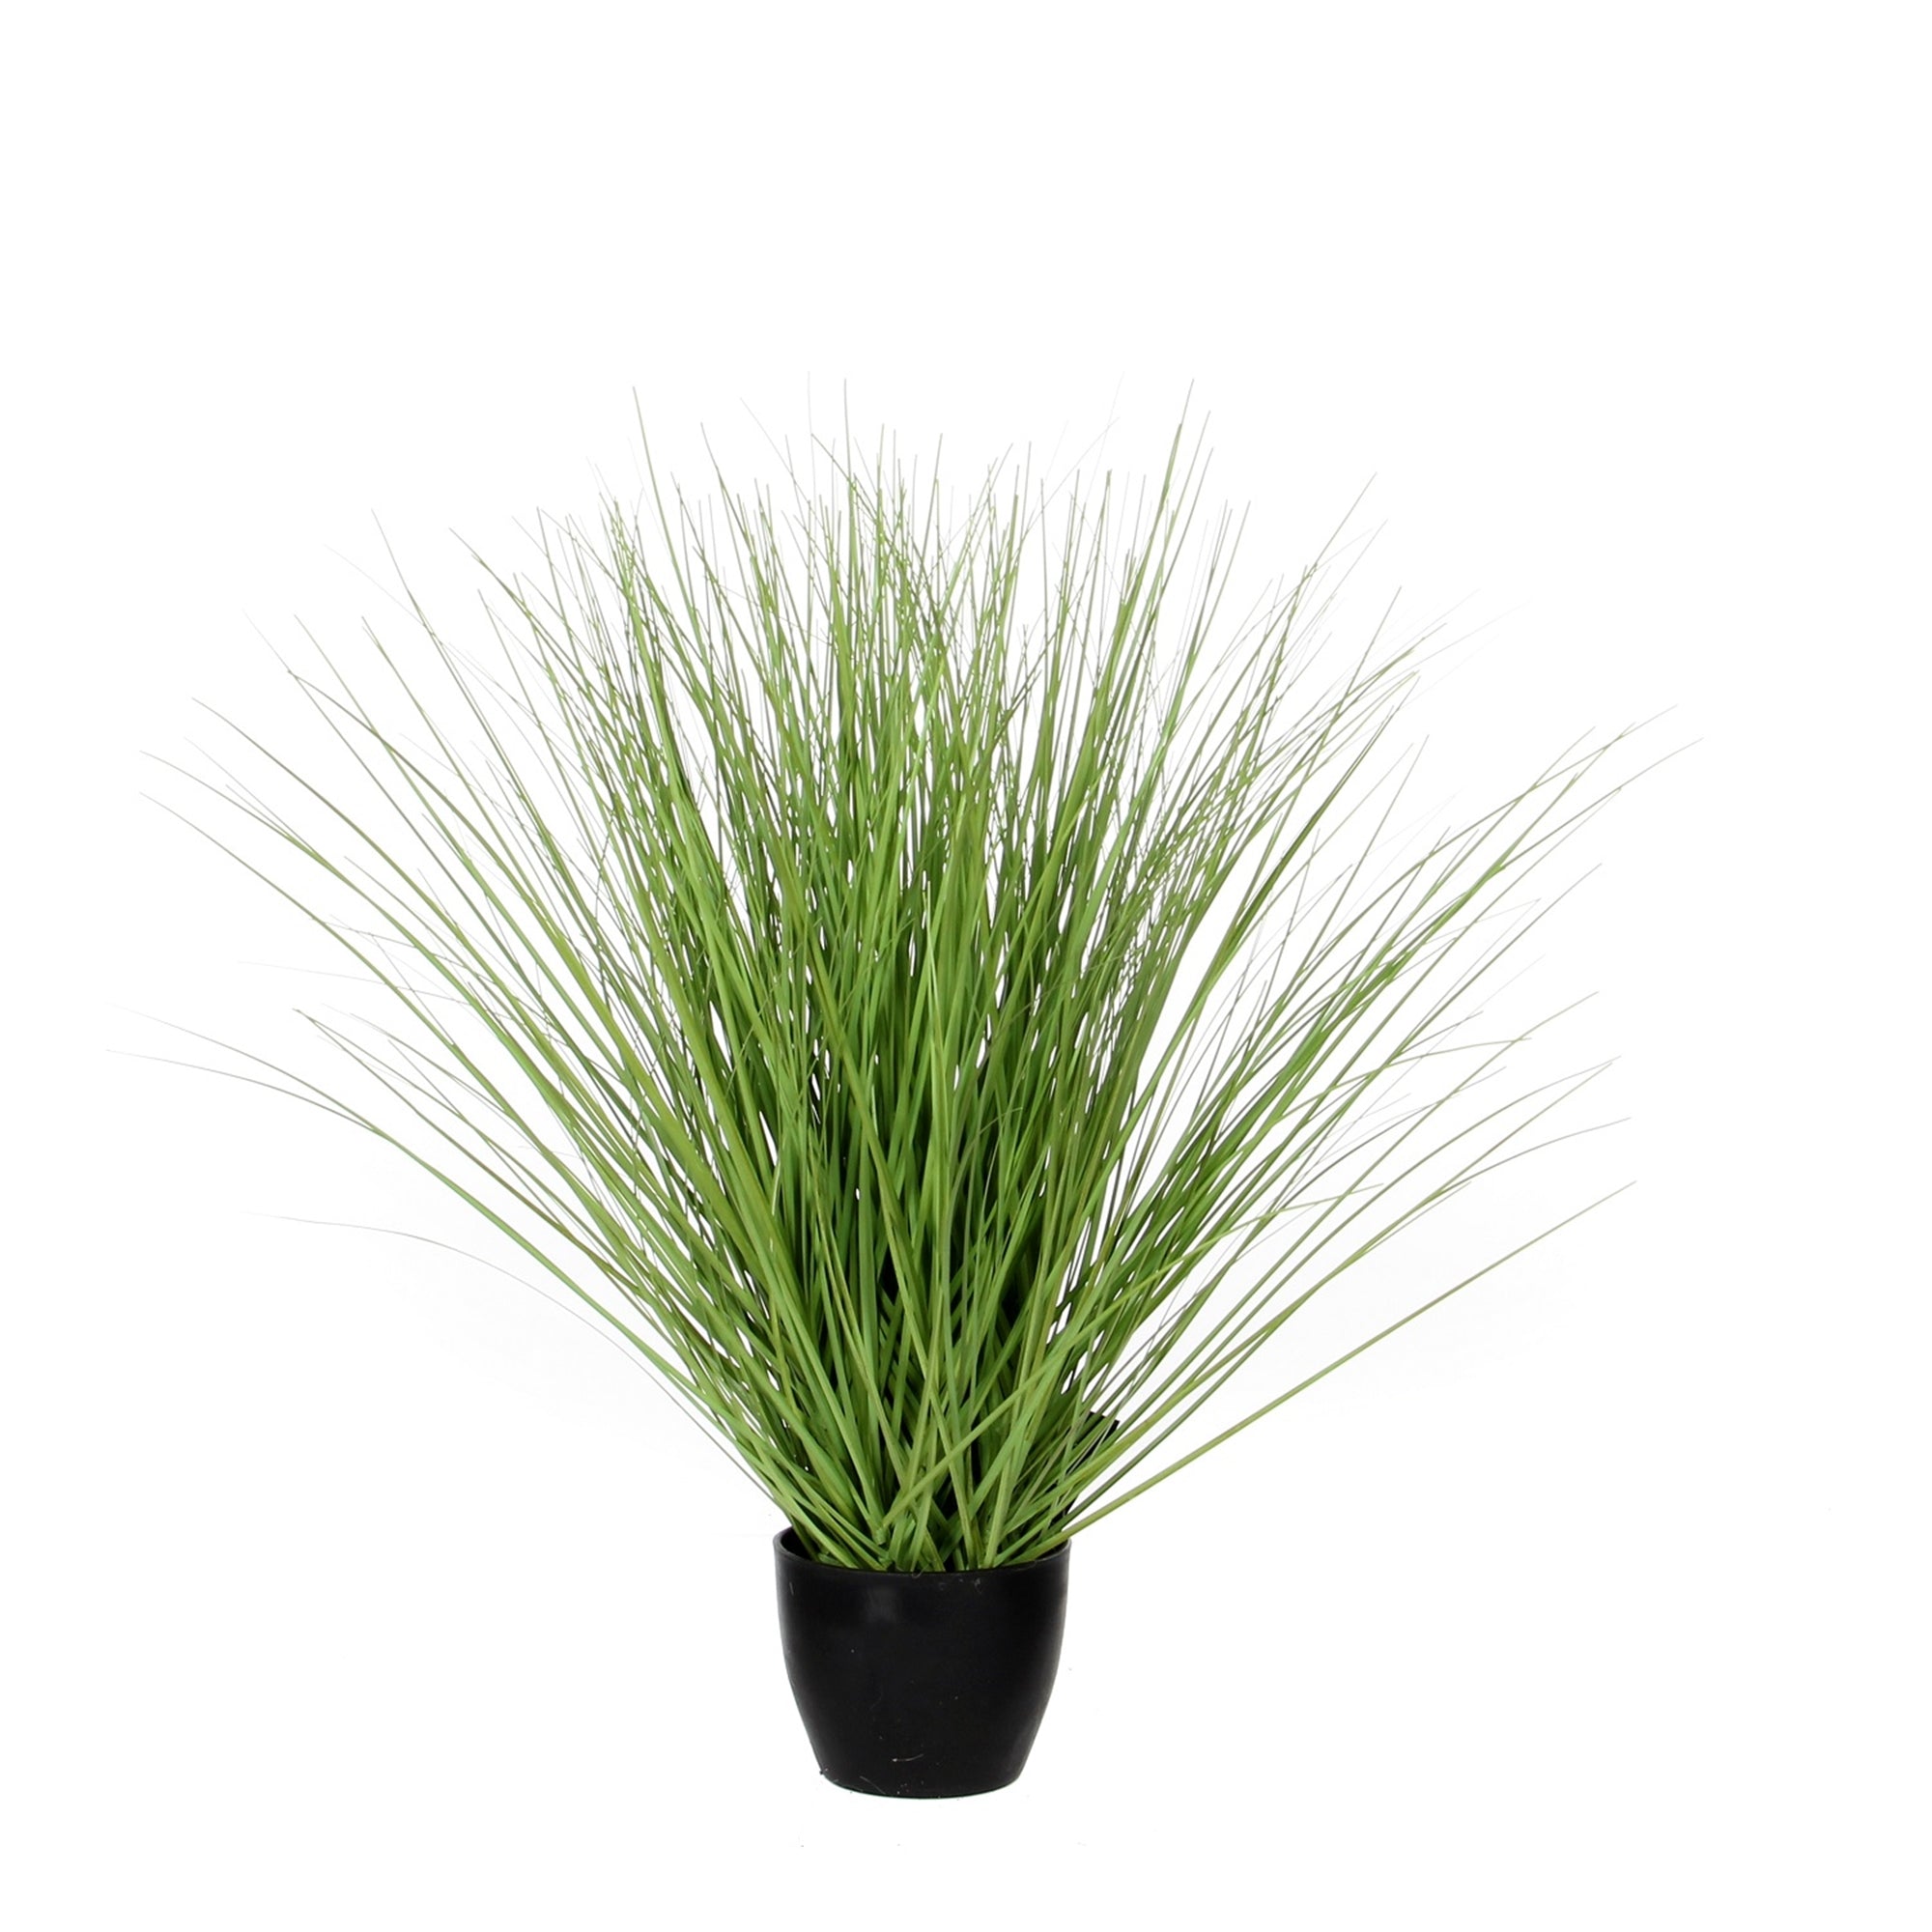 Large Grass Green in Plastic Pot